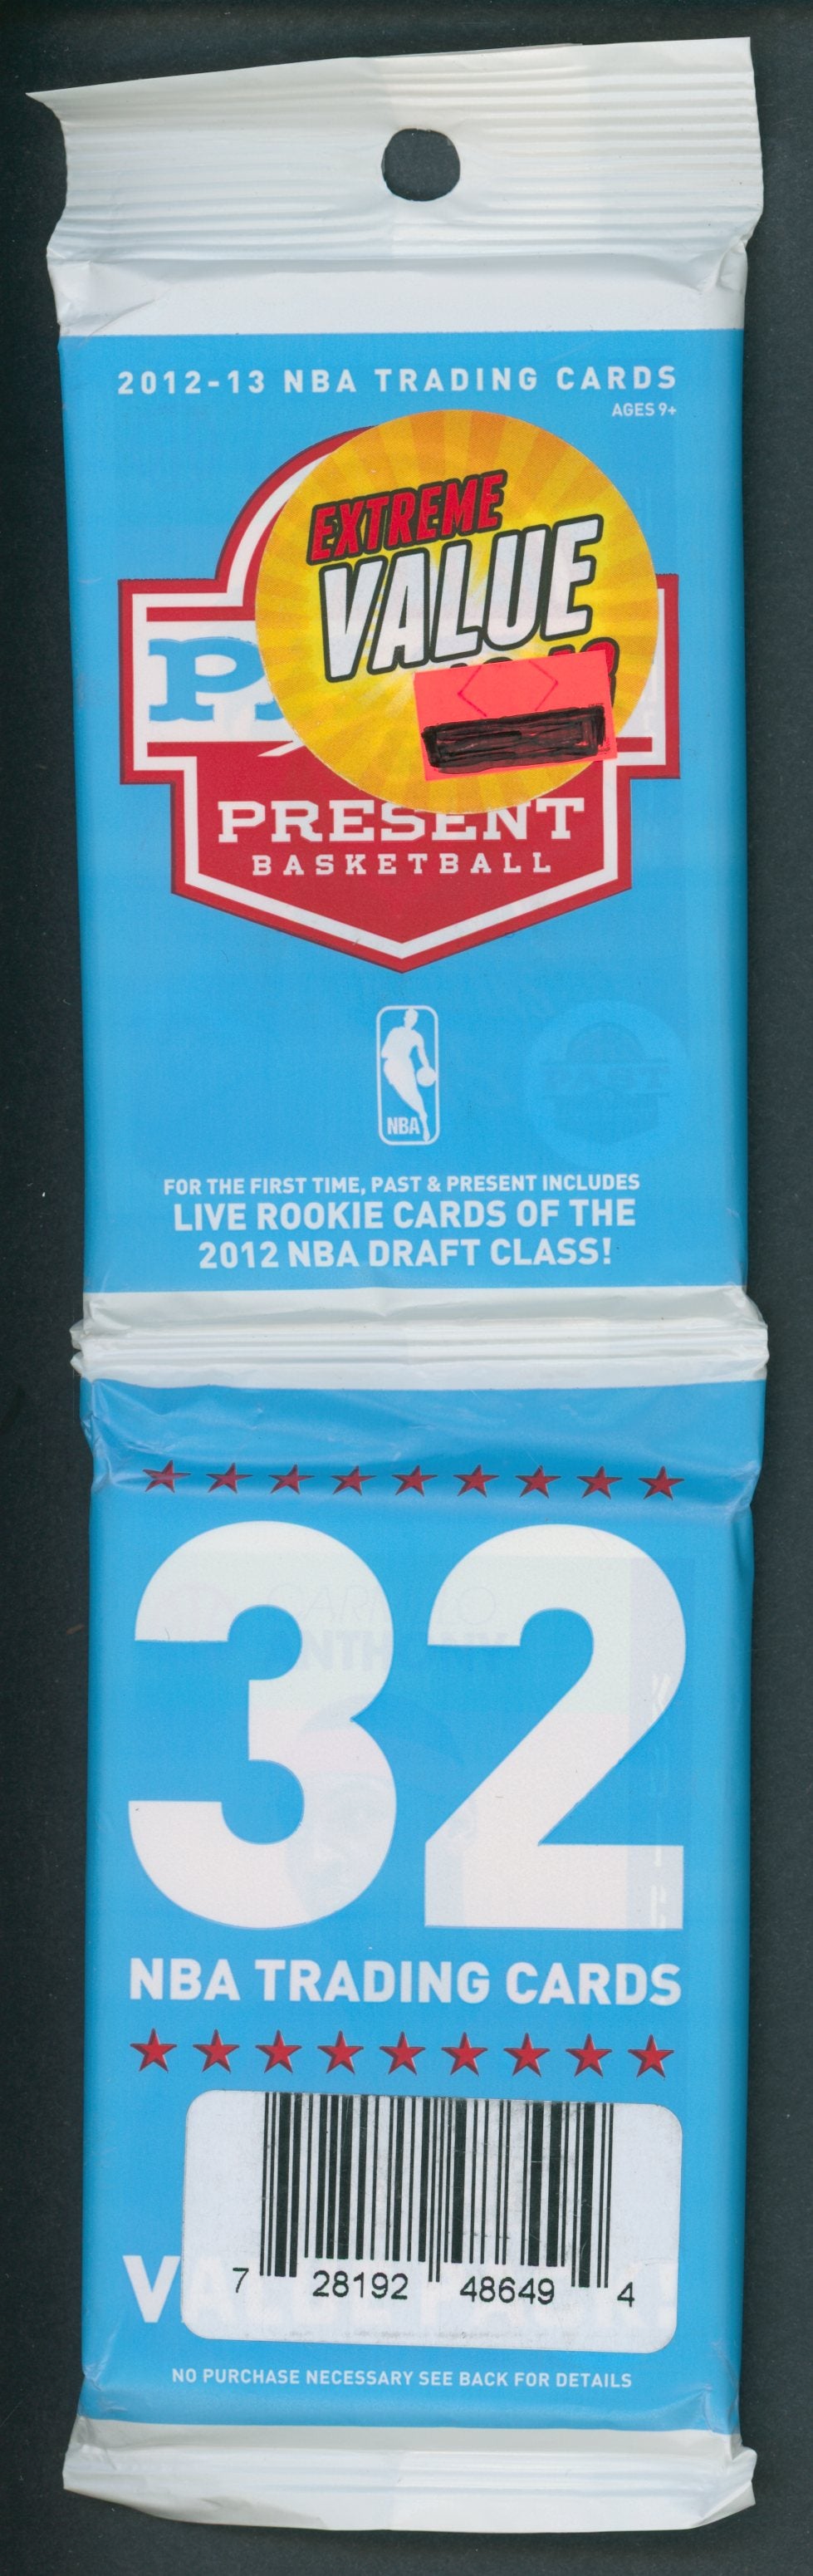 2012/13 Panini Past Present Basketball Unopened Value Pack (32)